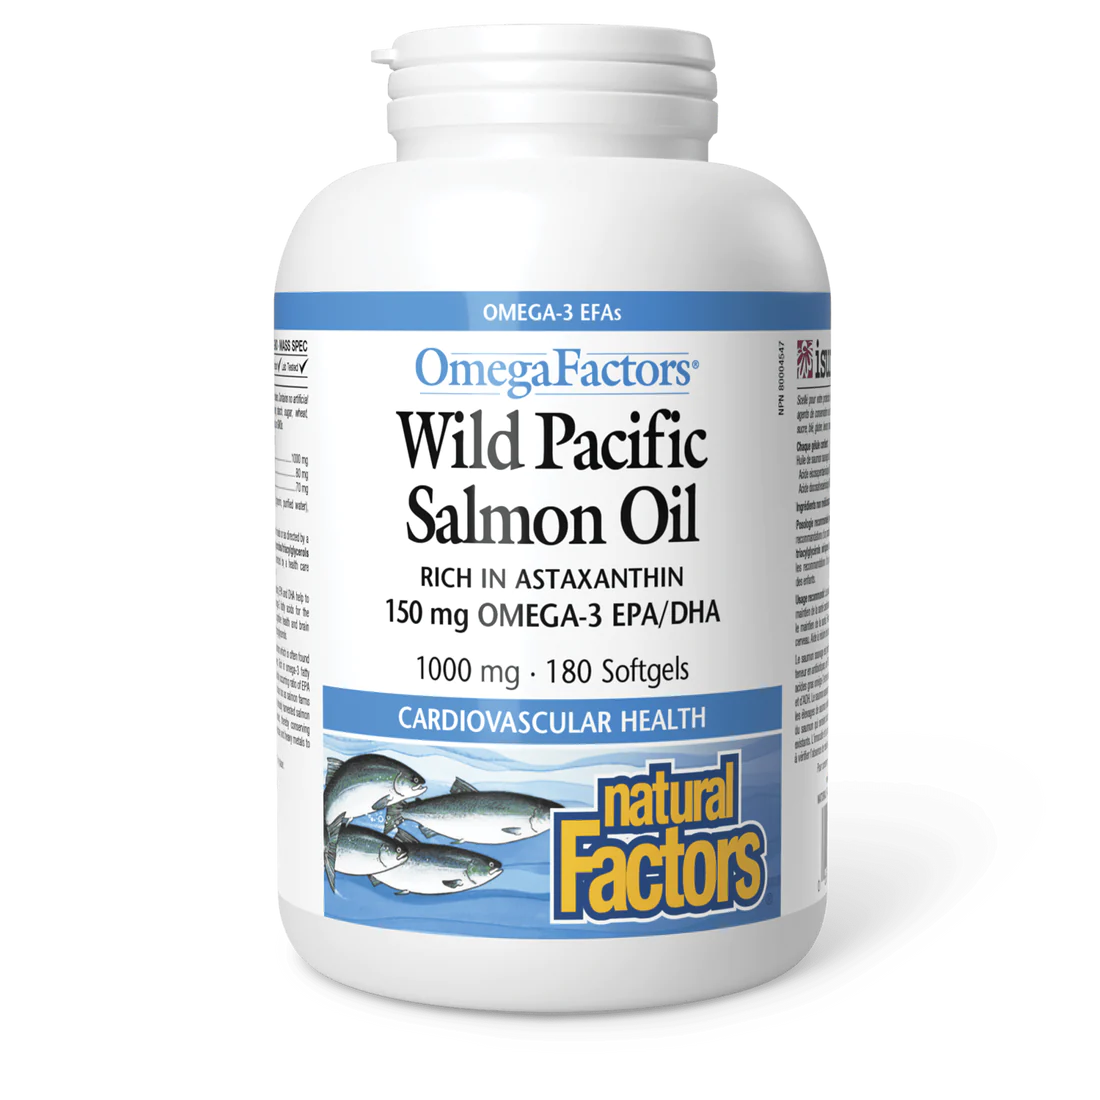 Wild Pacific Salmon Oil by Natural Factors, 180 Softgels 1000 mg